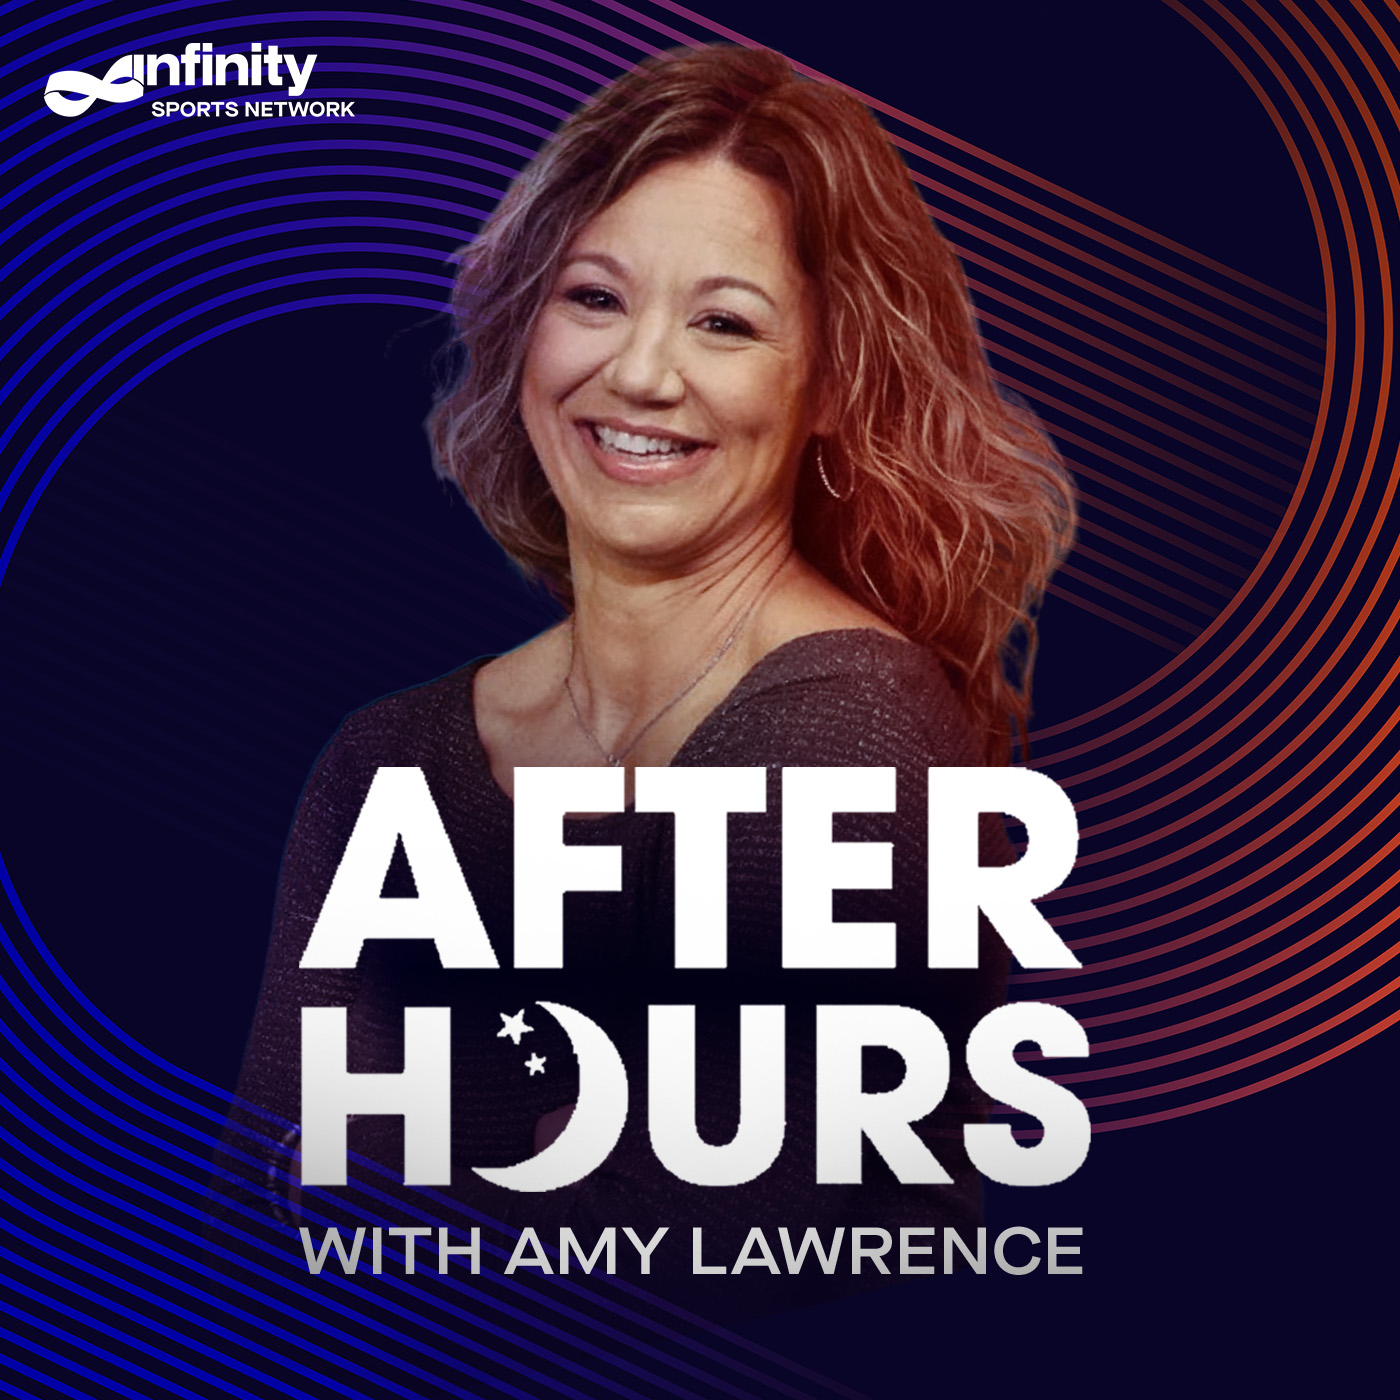 6/23/21 After Hours with Amy Lawrence PODCAST: Hour 2